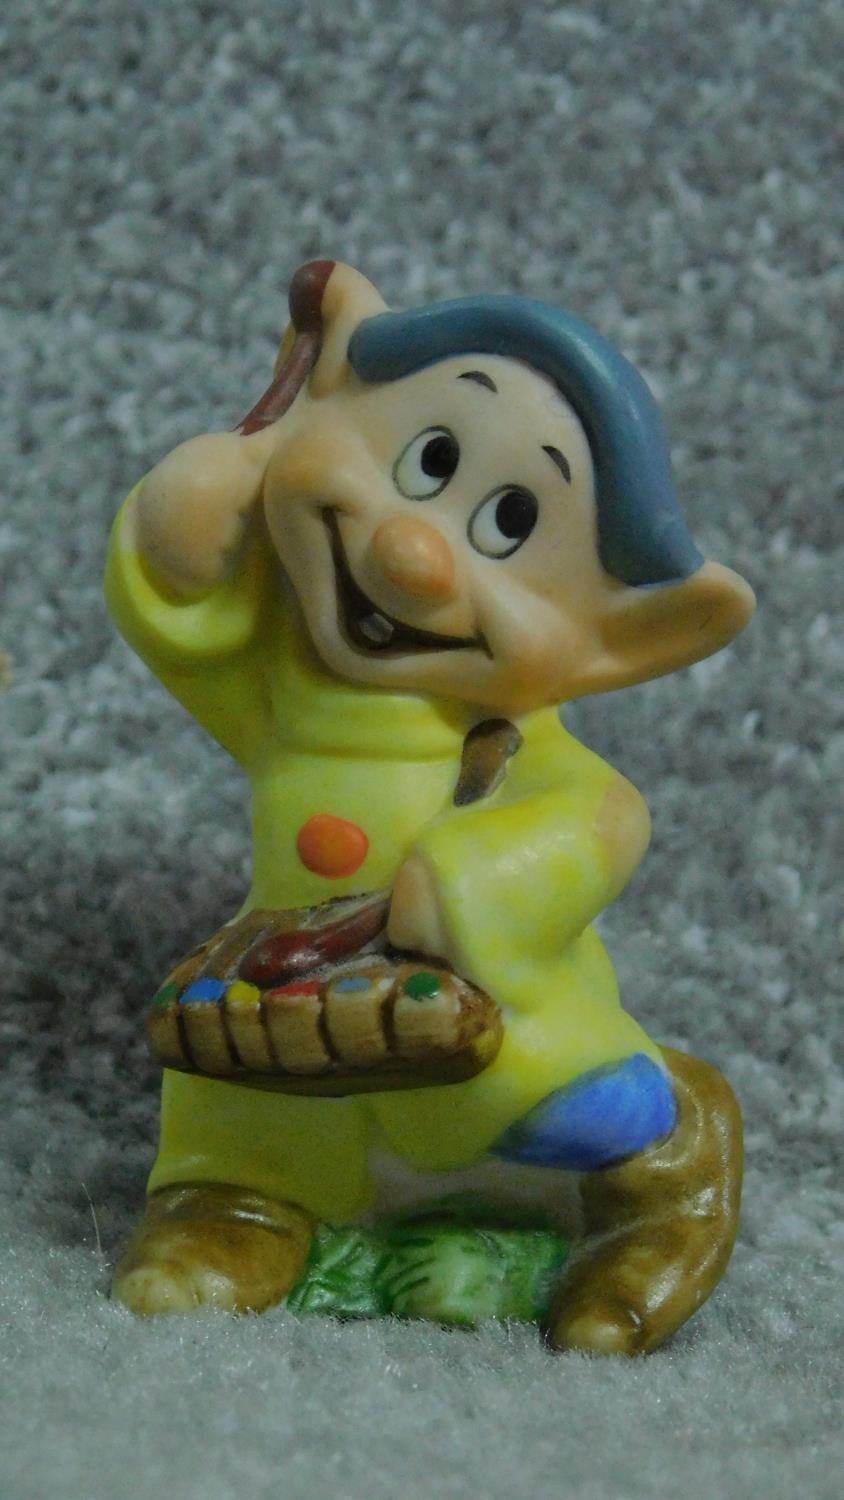 A collection of porcelain hand painted figures of Snow White and the seven dwarves by Schmid for The - Image 6 of 10